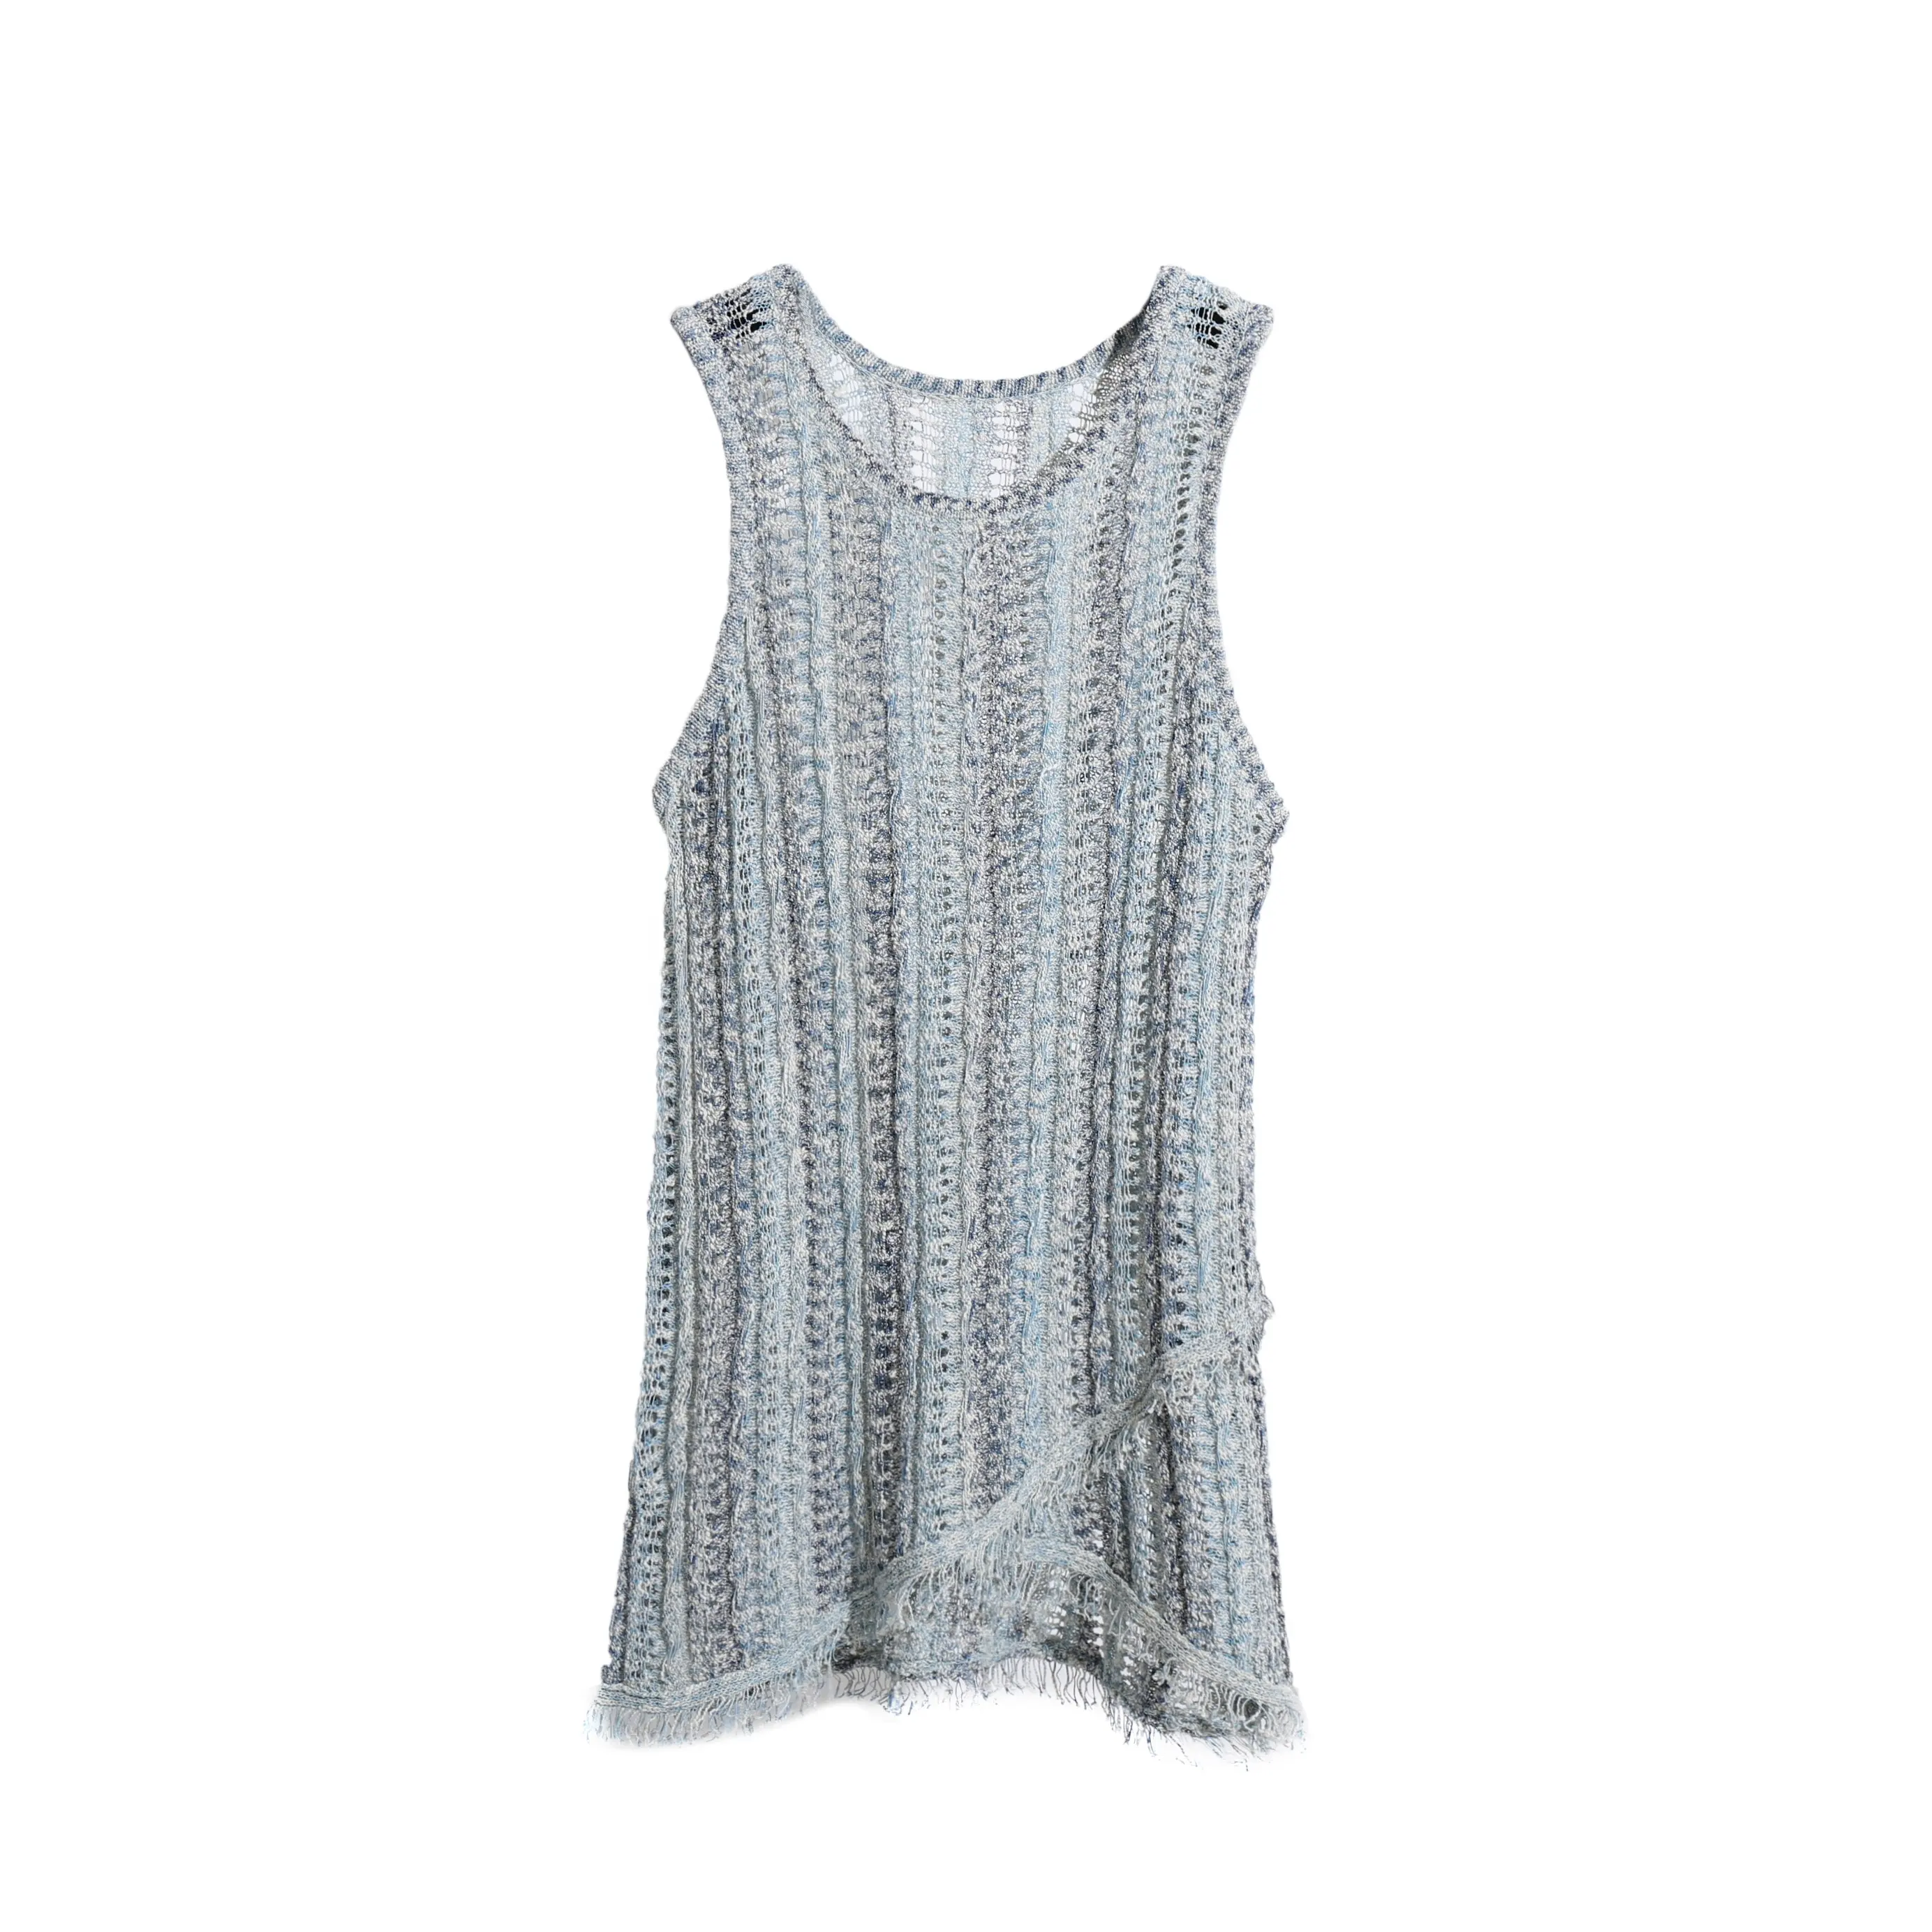 Weshallo New Design Custom Hollow Out Pullovers Sleeveless Knitted Cotton Sweater Vest Women